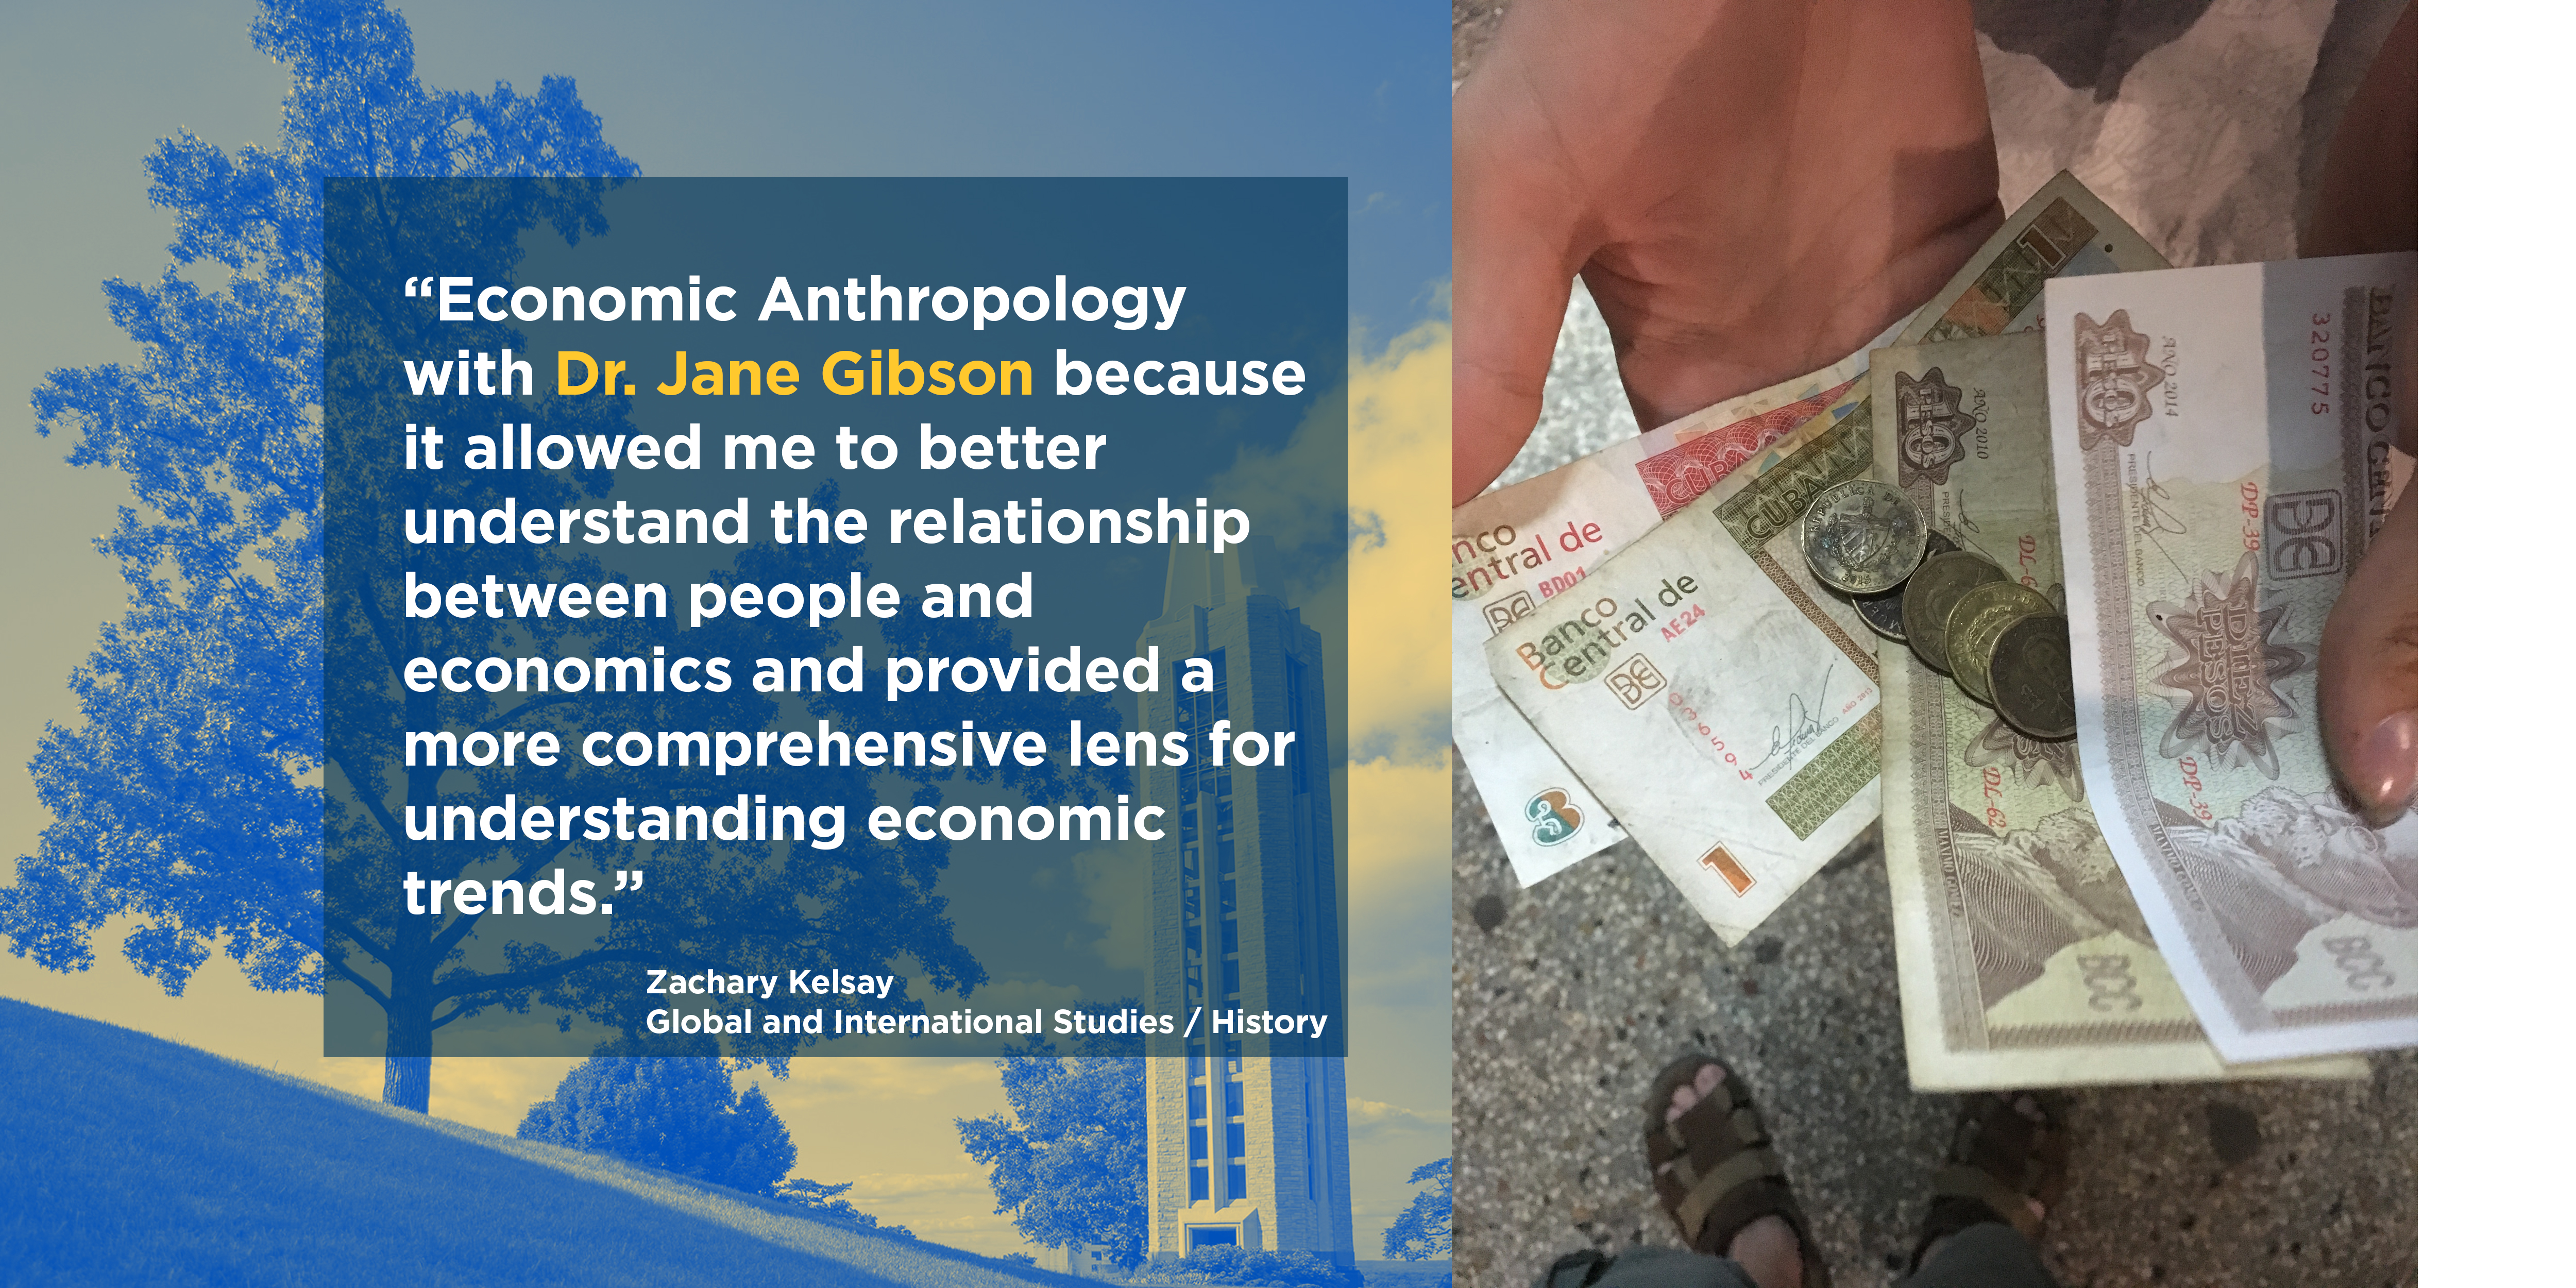 “Economic Anthropology with Dr. Jane Gibson because it allowed me to better understand the relationship between people and economics and provided a more comprehensive lens for understanding economic trends.”